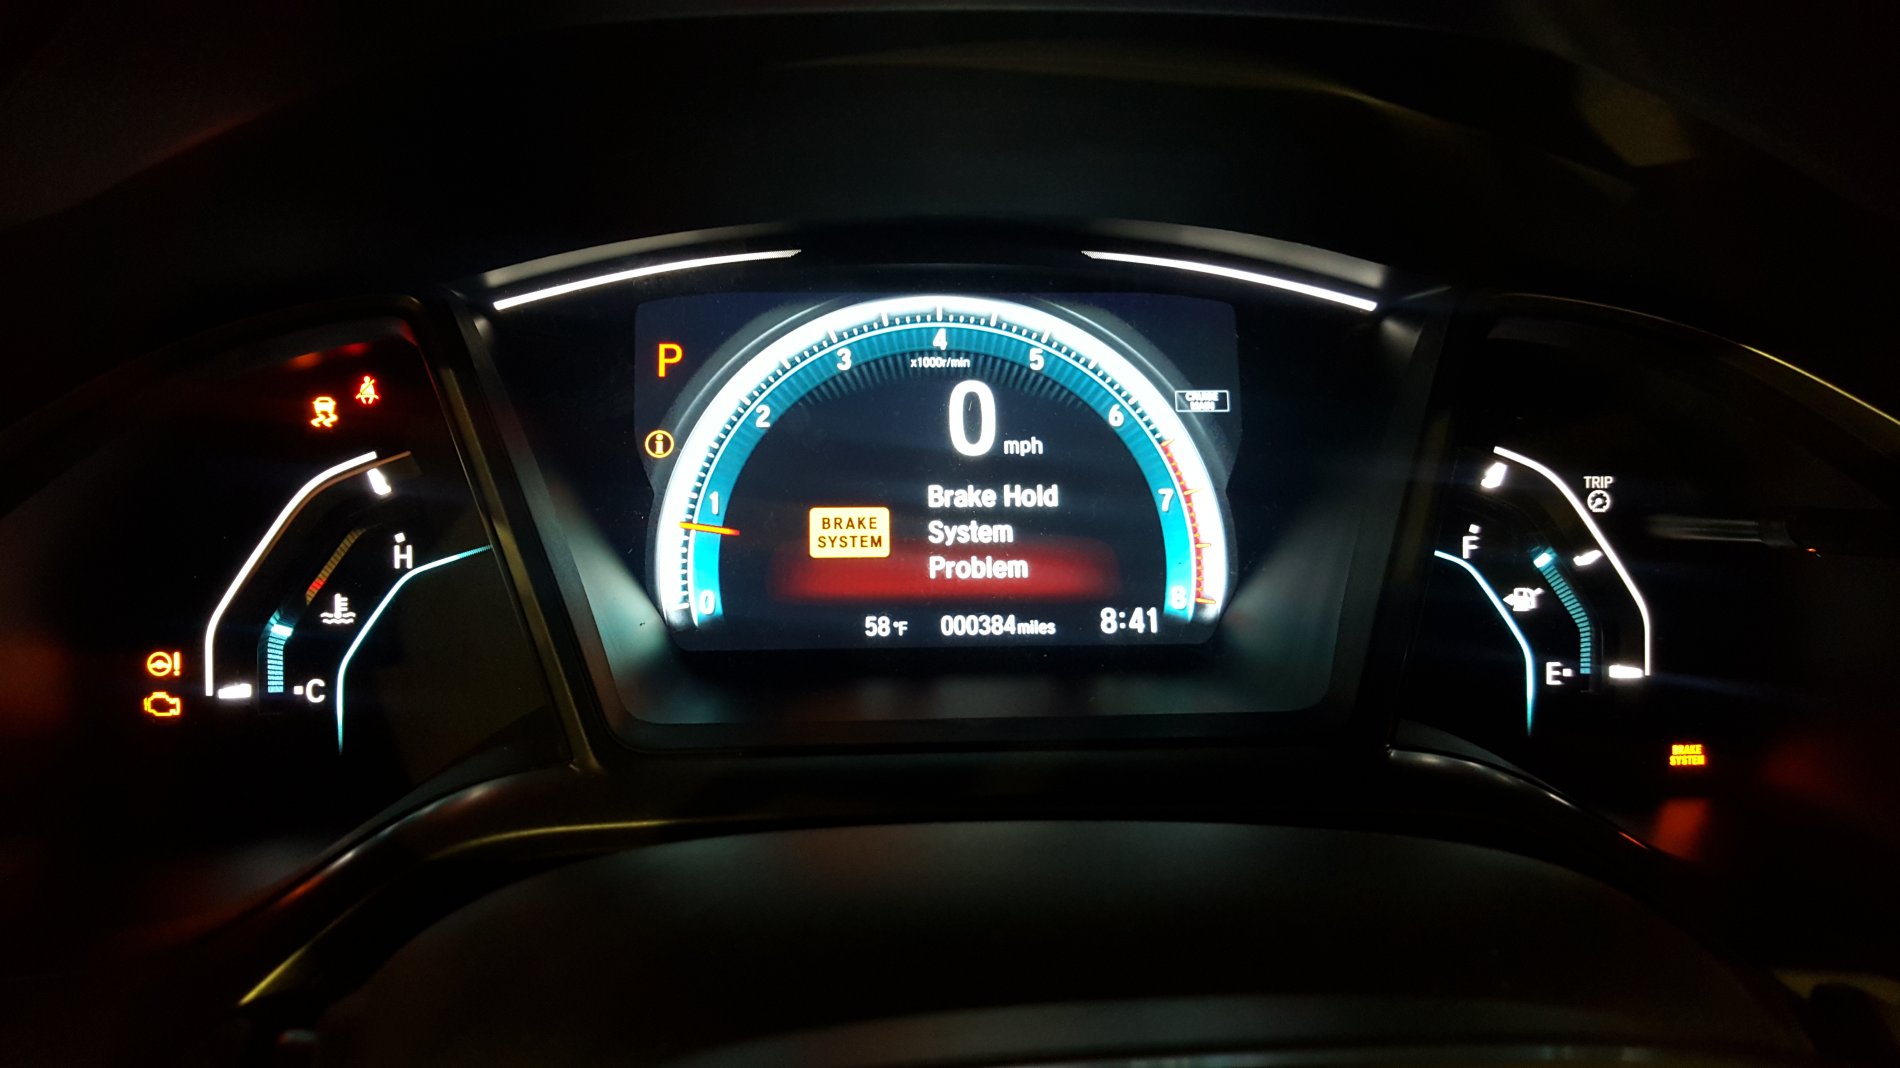 Tried disabling DRL lights and now I have dash errors that wont go away